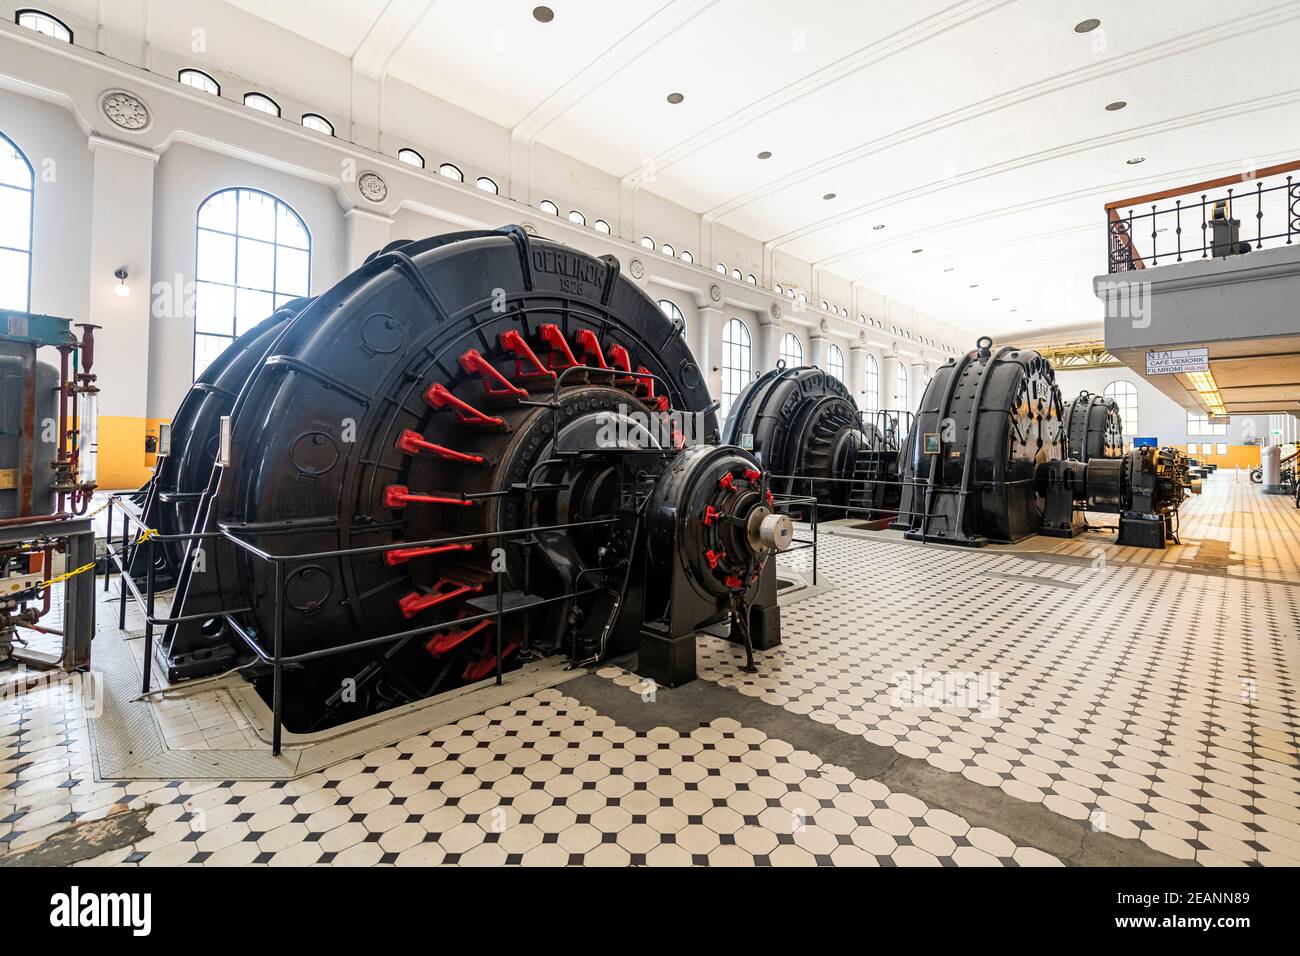 Old turbines in the Hydroelectric power station, Rjukan-Notodden Industrial Heritage Site, Norway Stock Photo